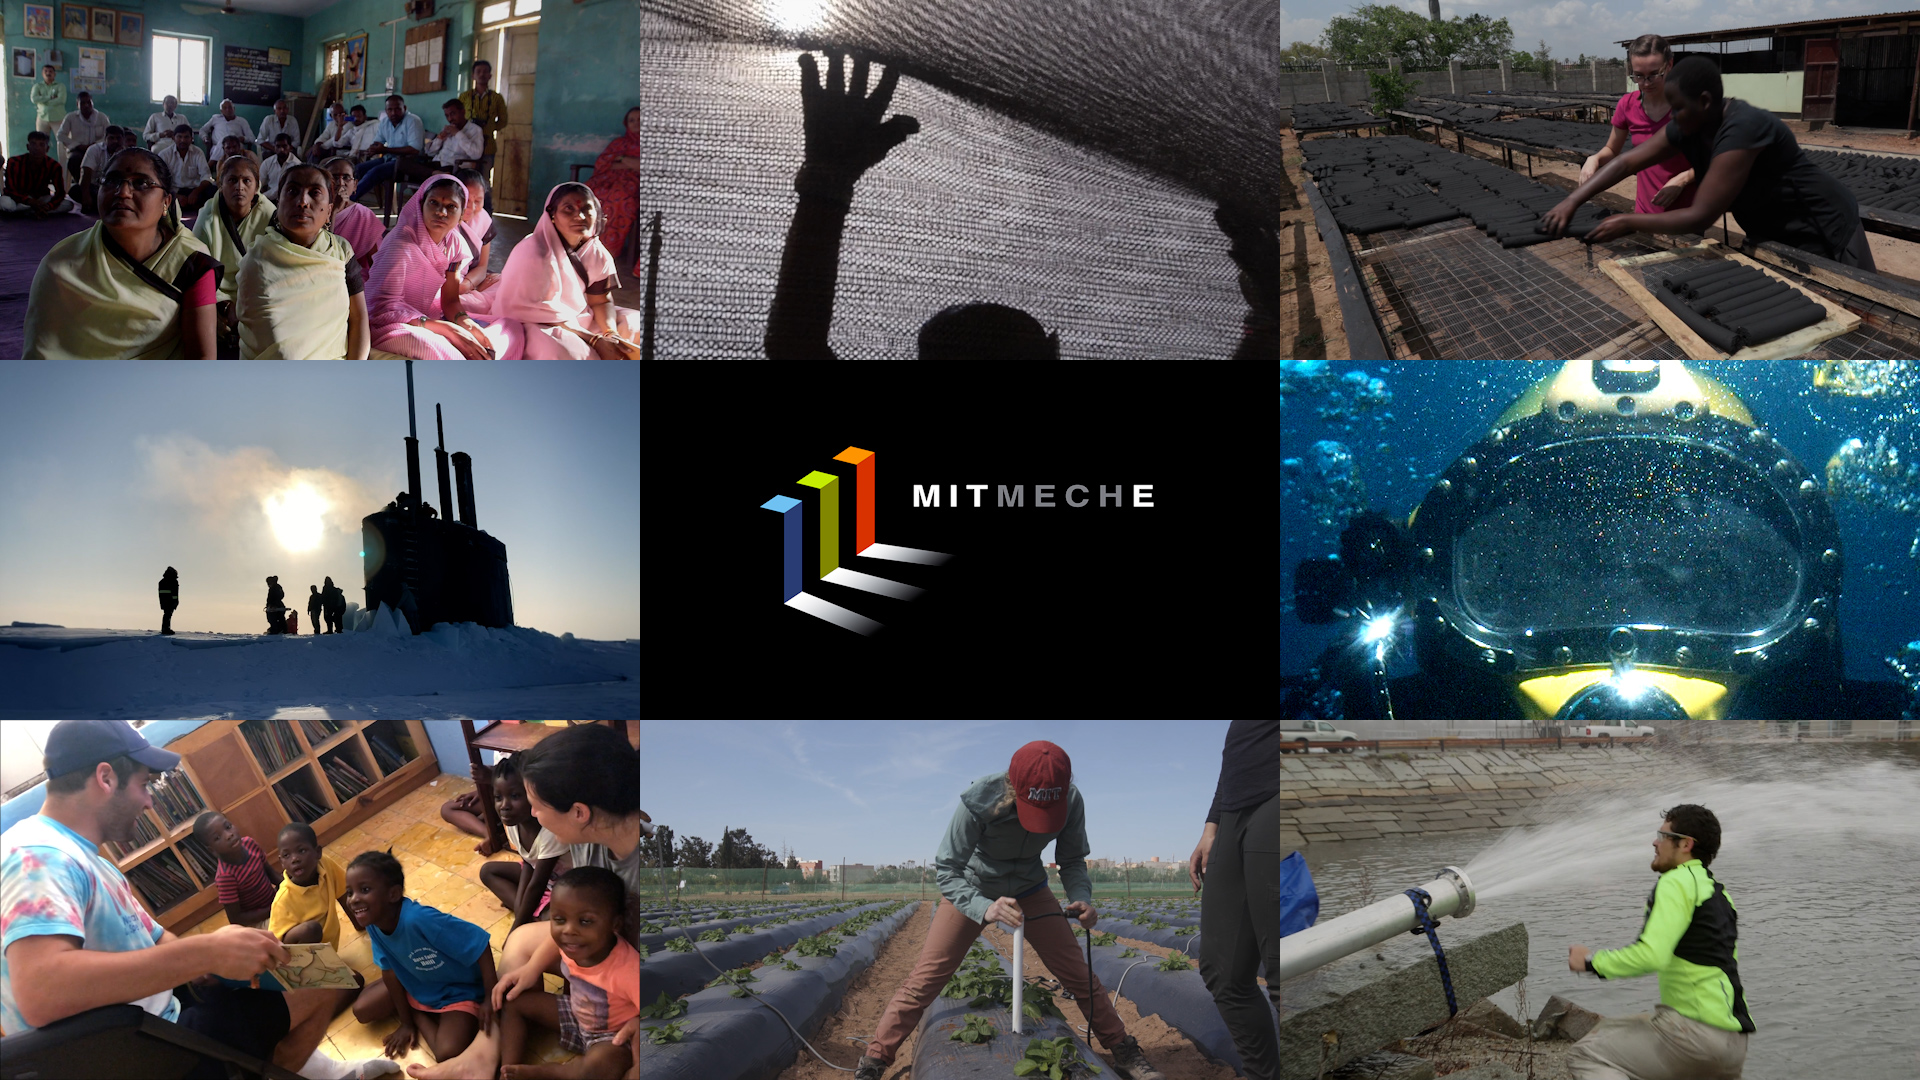 Nine boxes showing various ways that MechE research impacts the world, with MIT MechE logo in middle square.